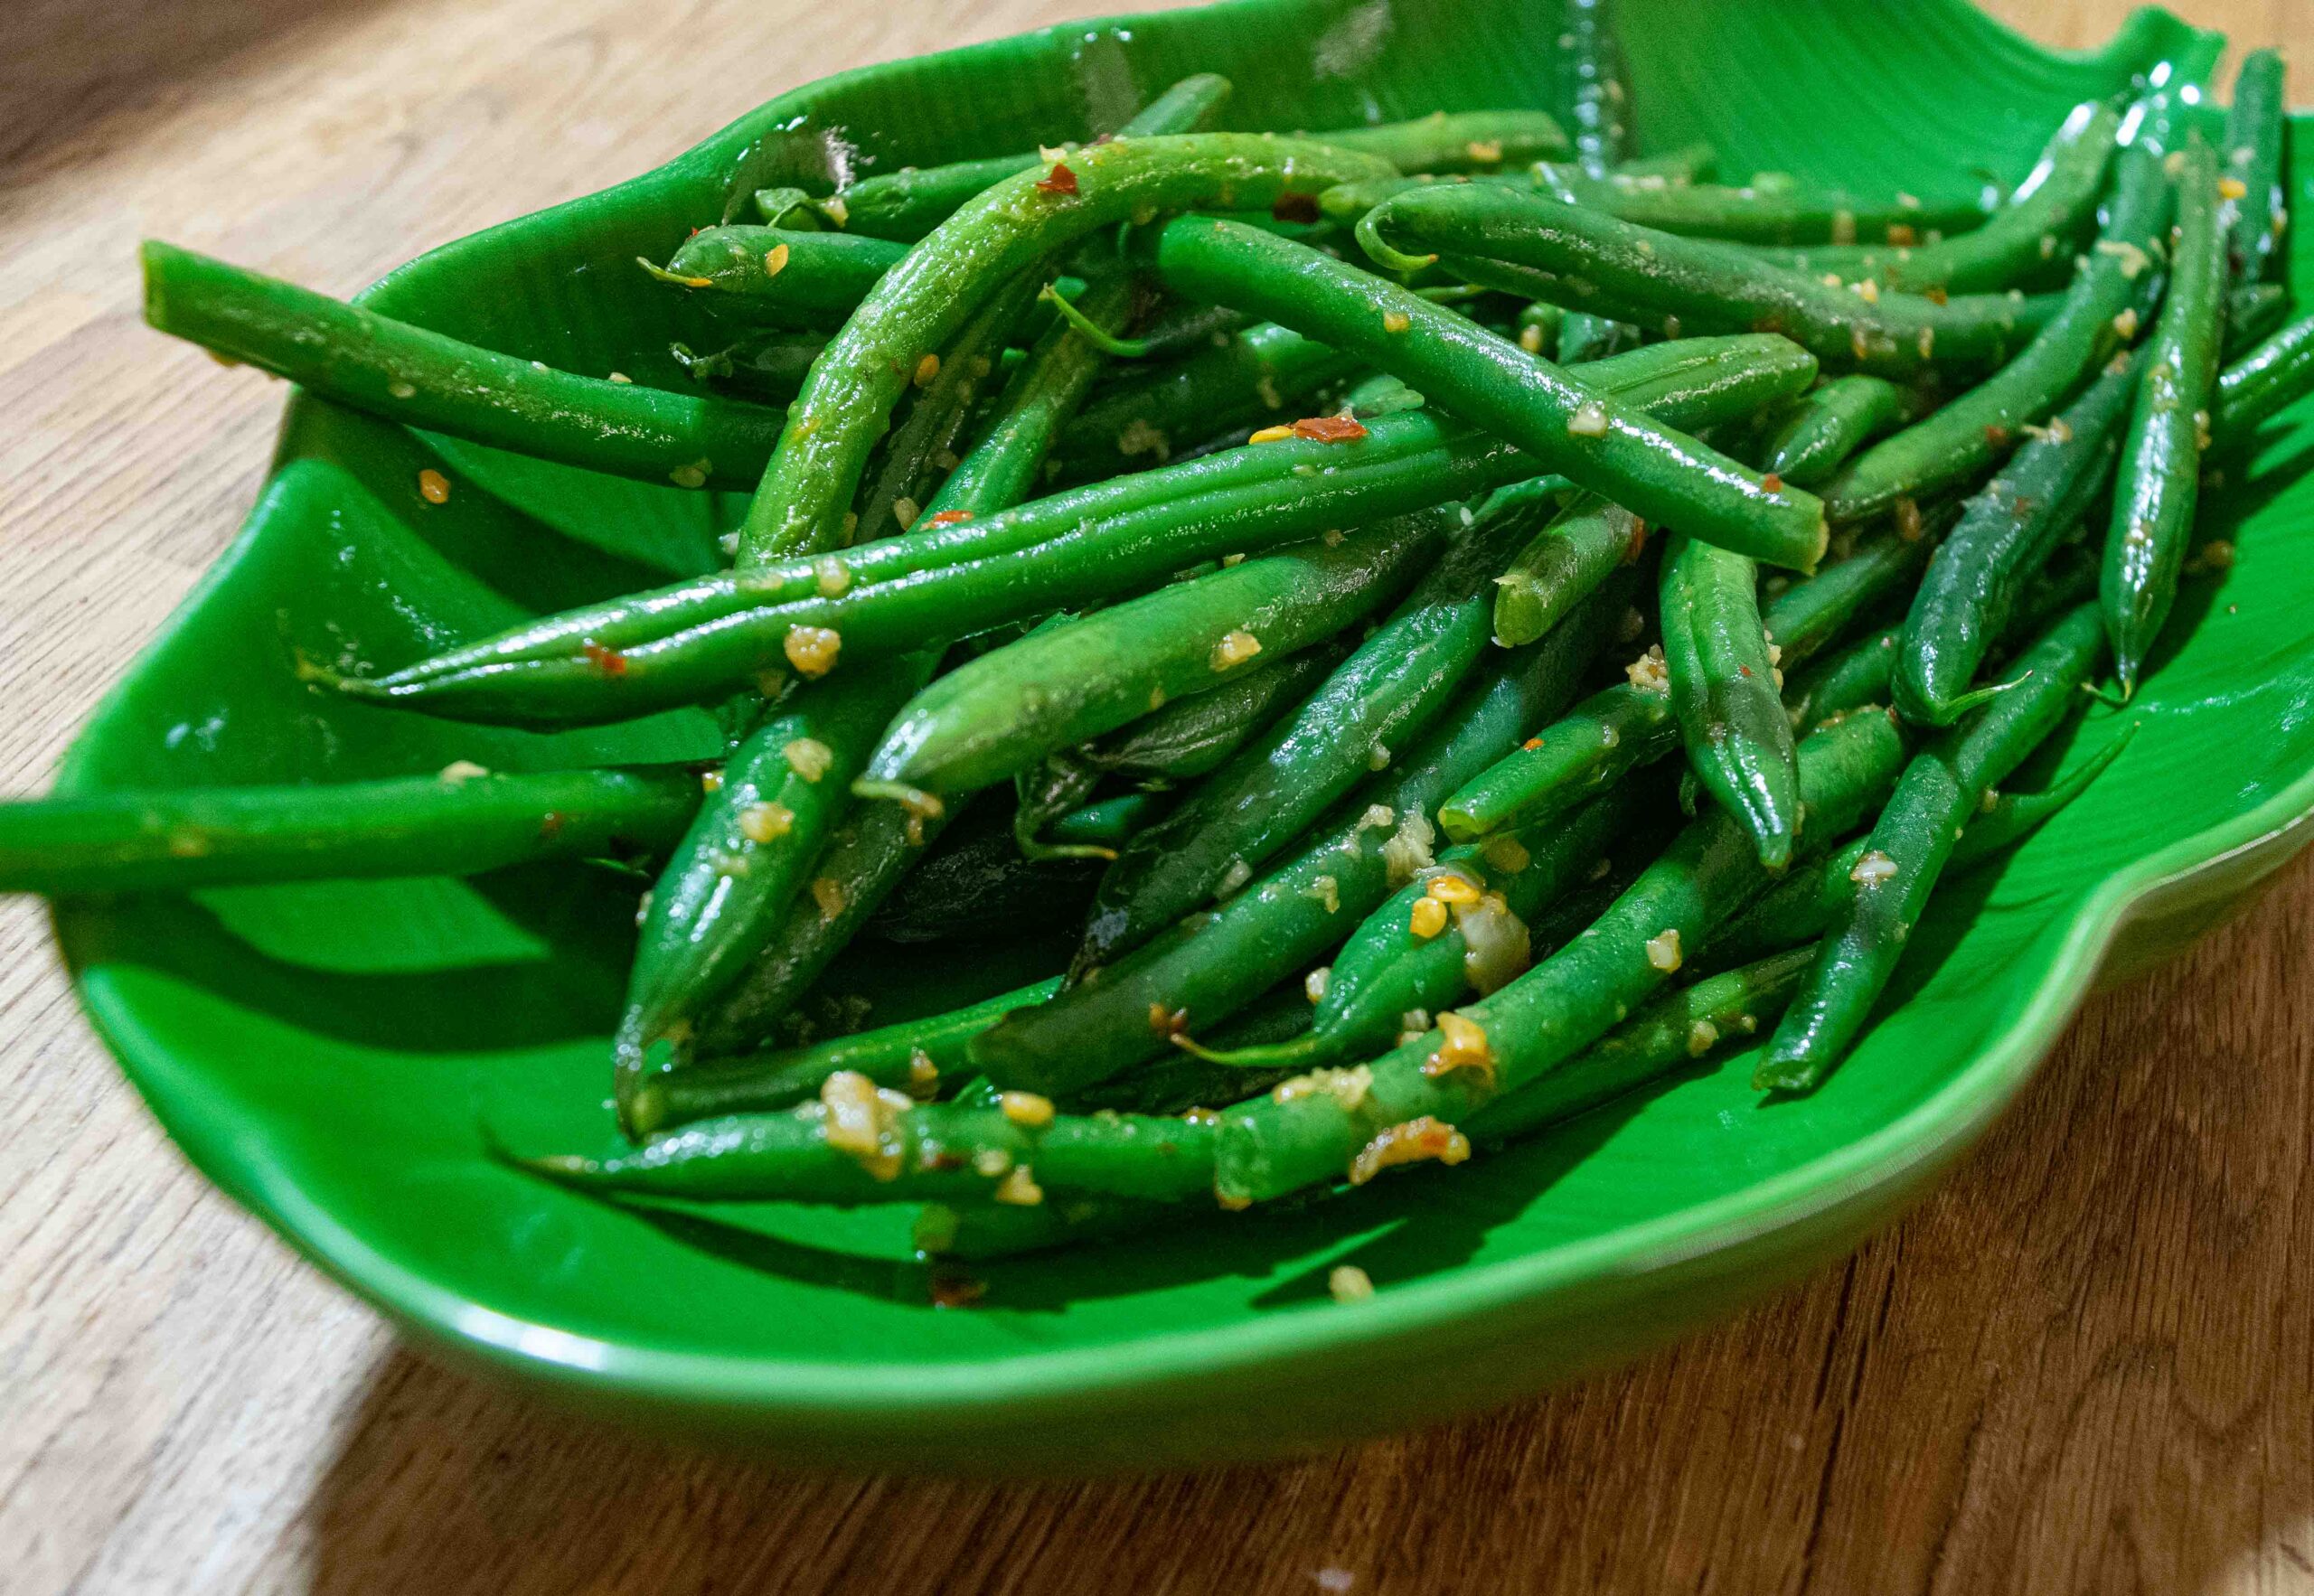 alt="stir-fried green beans with garlic and chili served on a ceramic palm leaf plate."